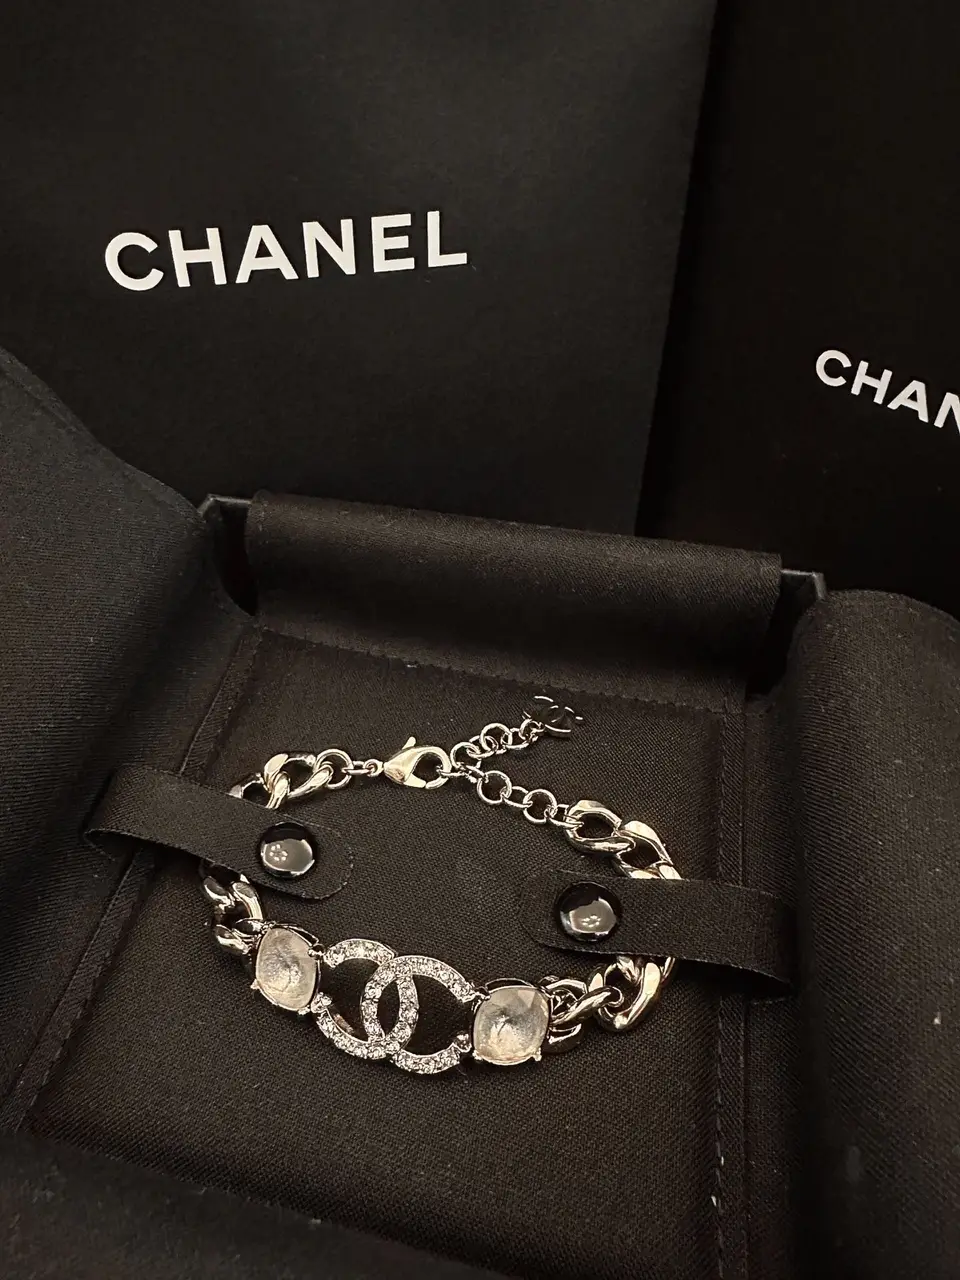 Chanel bracelet✨✨✨, Gallery posted by Anny